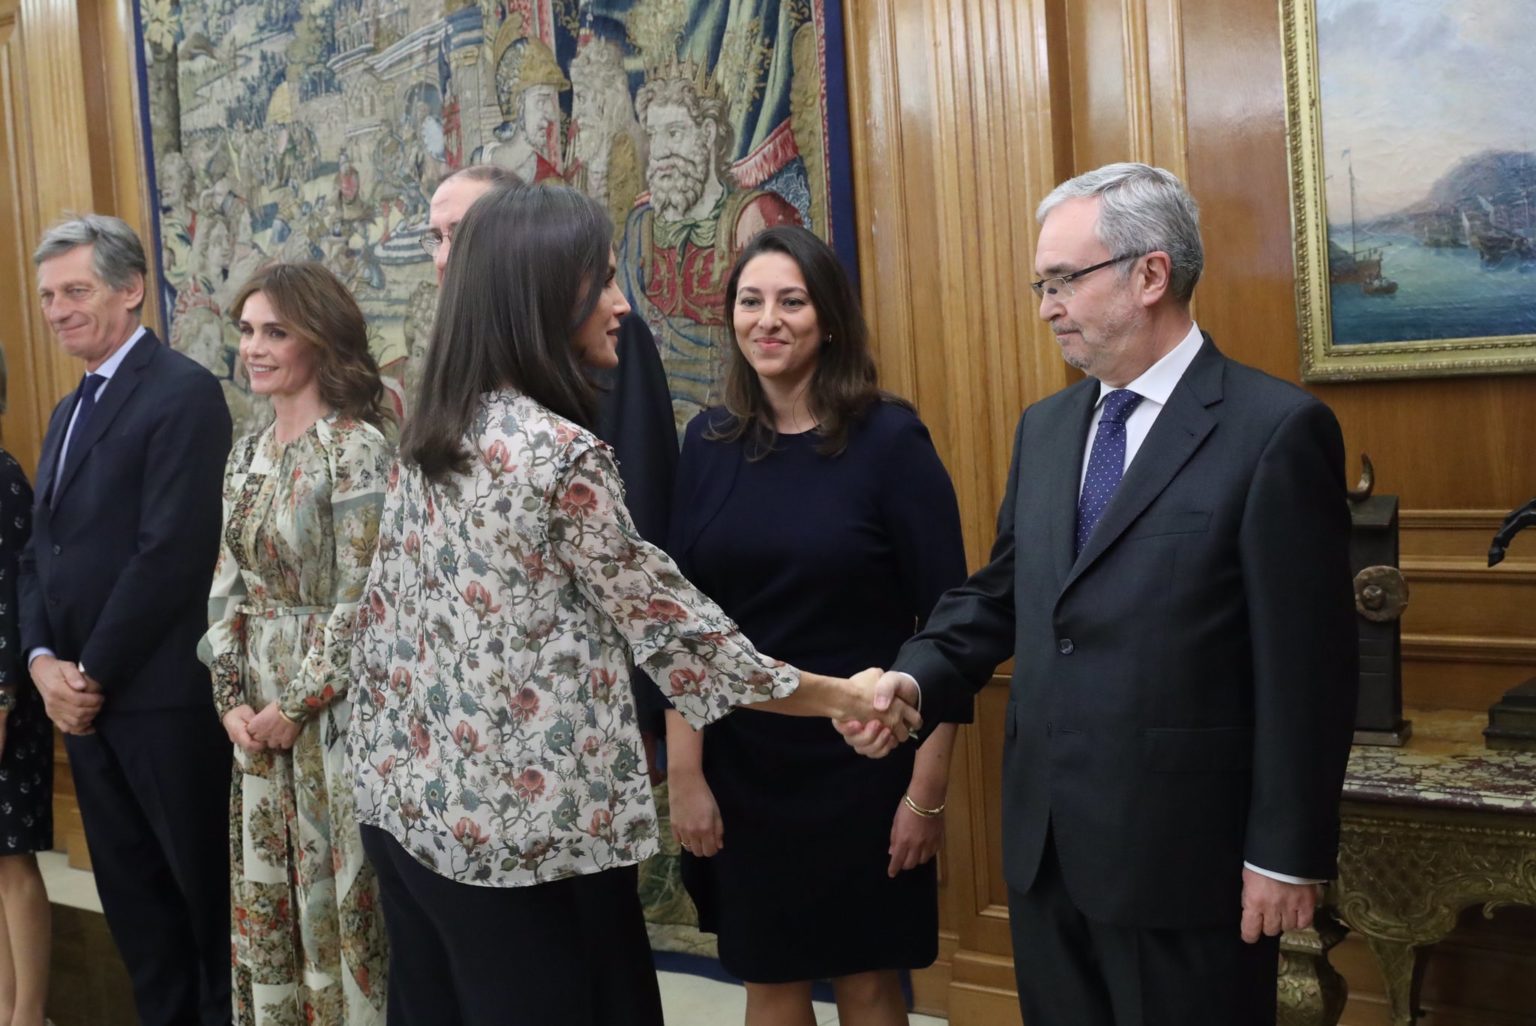 Queen Letizia brought Early Spring vibes to Palace Audience ...